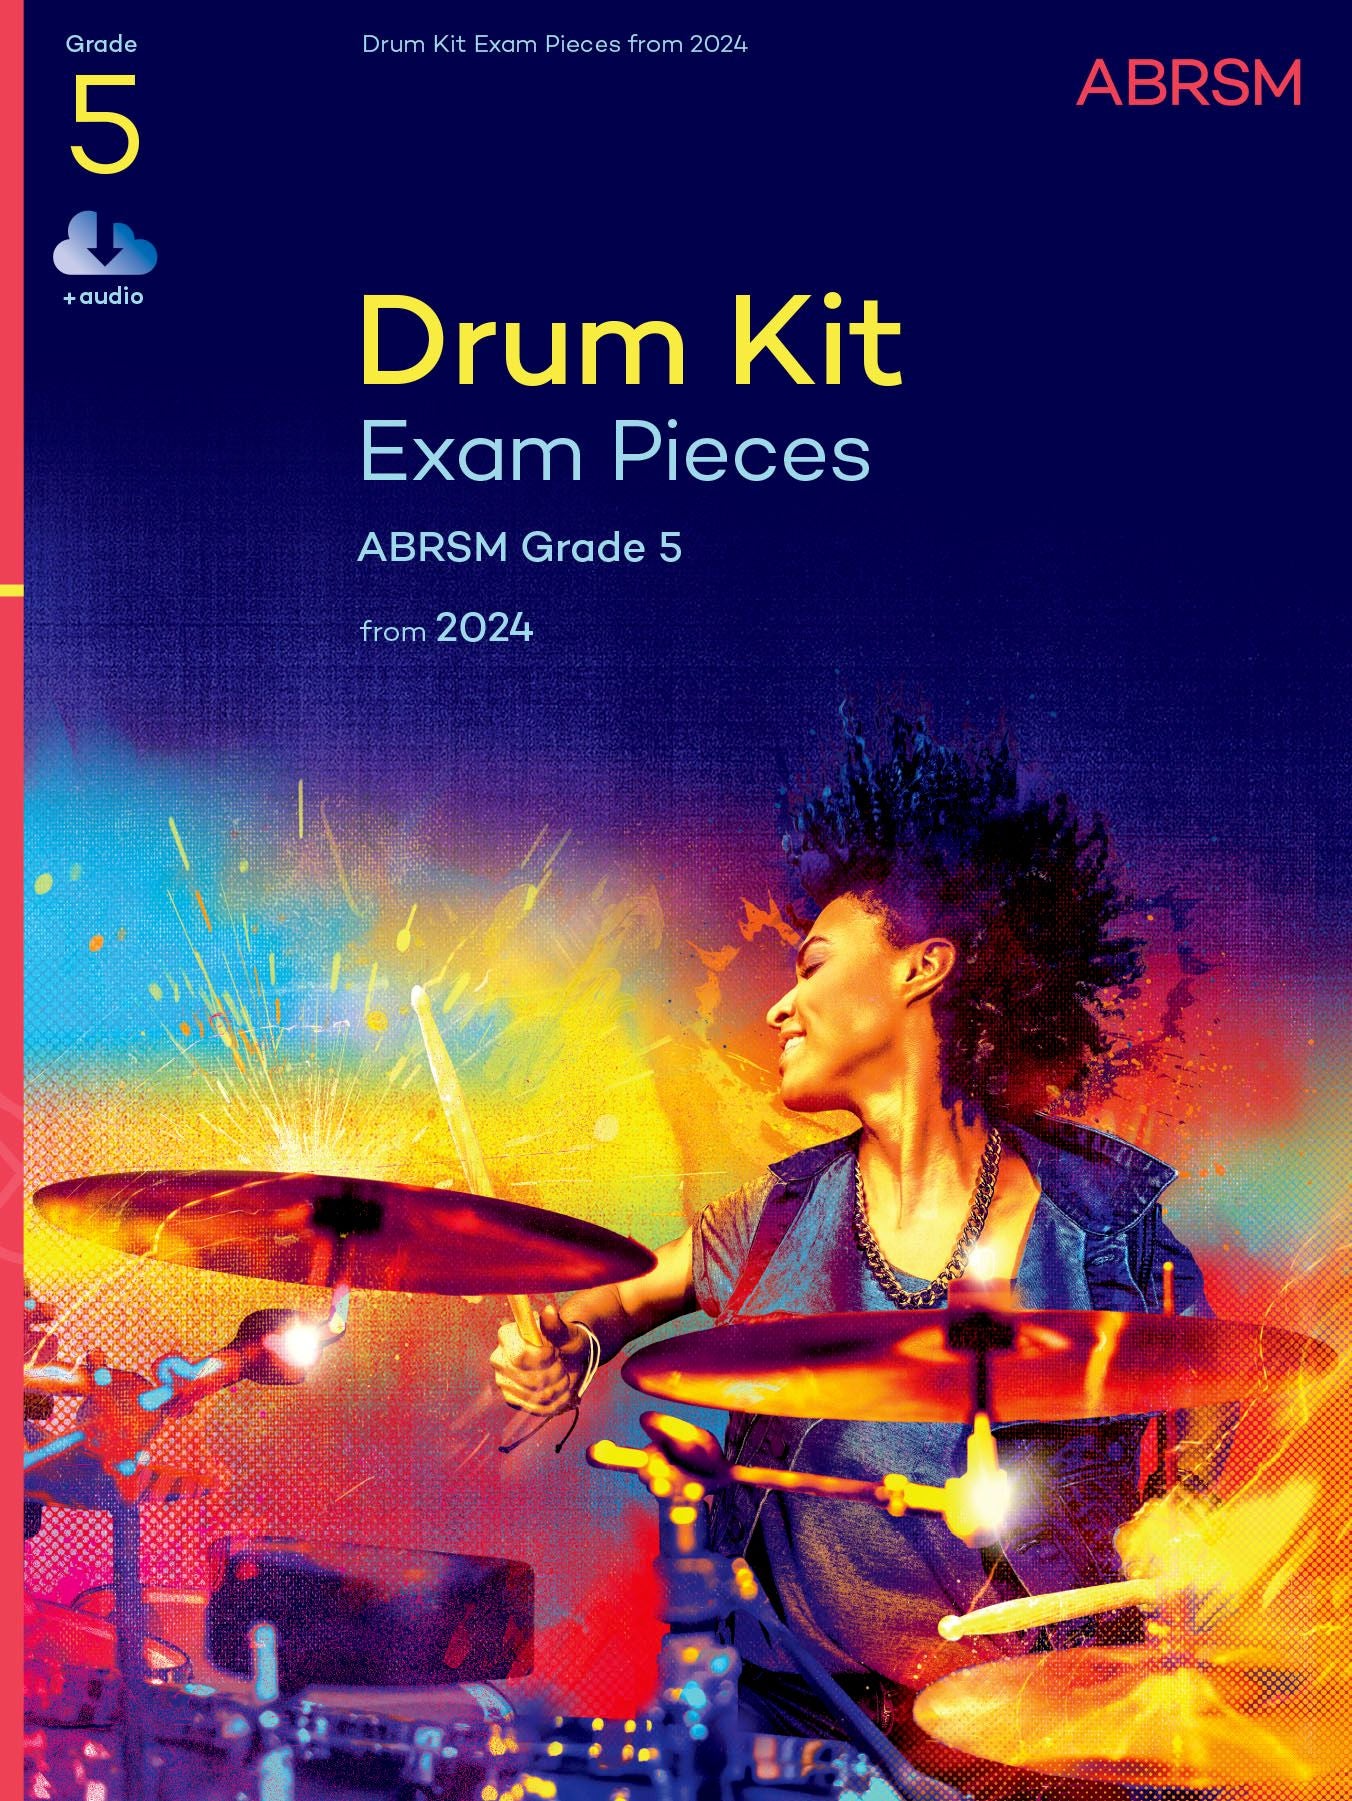 ABRSM Drum Kit Exam Pieces Grade 5 from 2024 (w/ Audio)